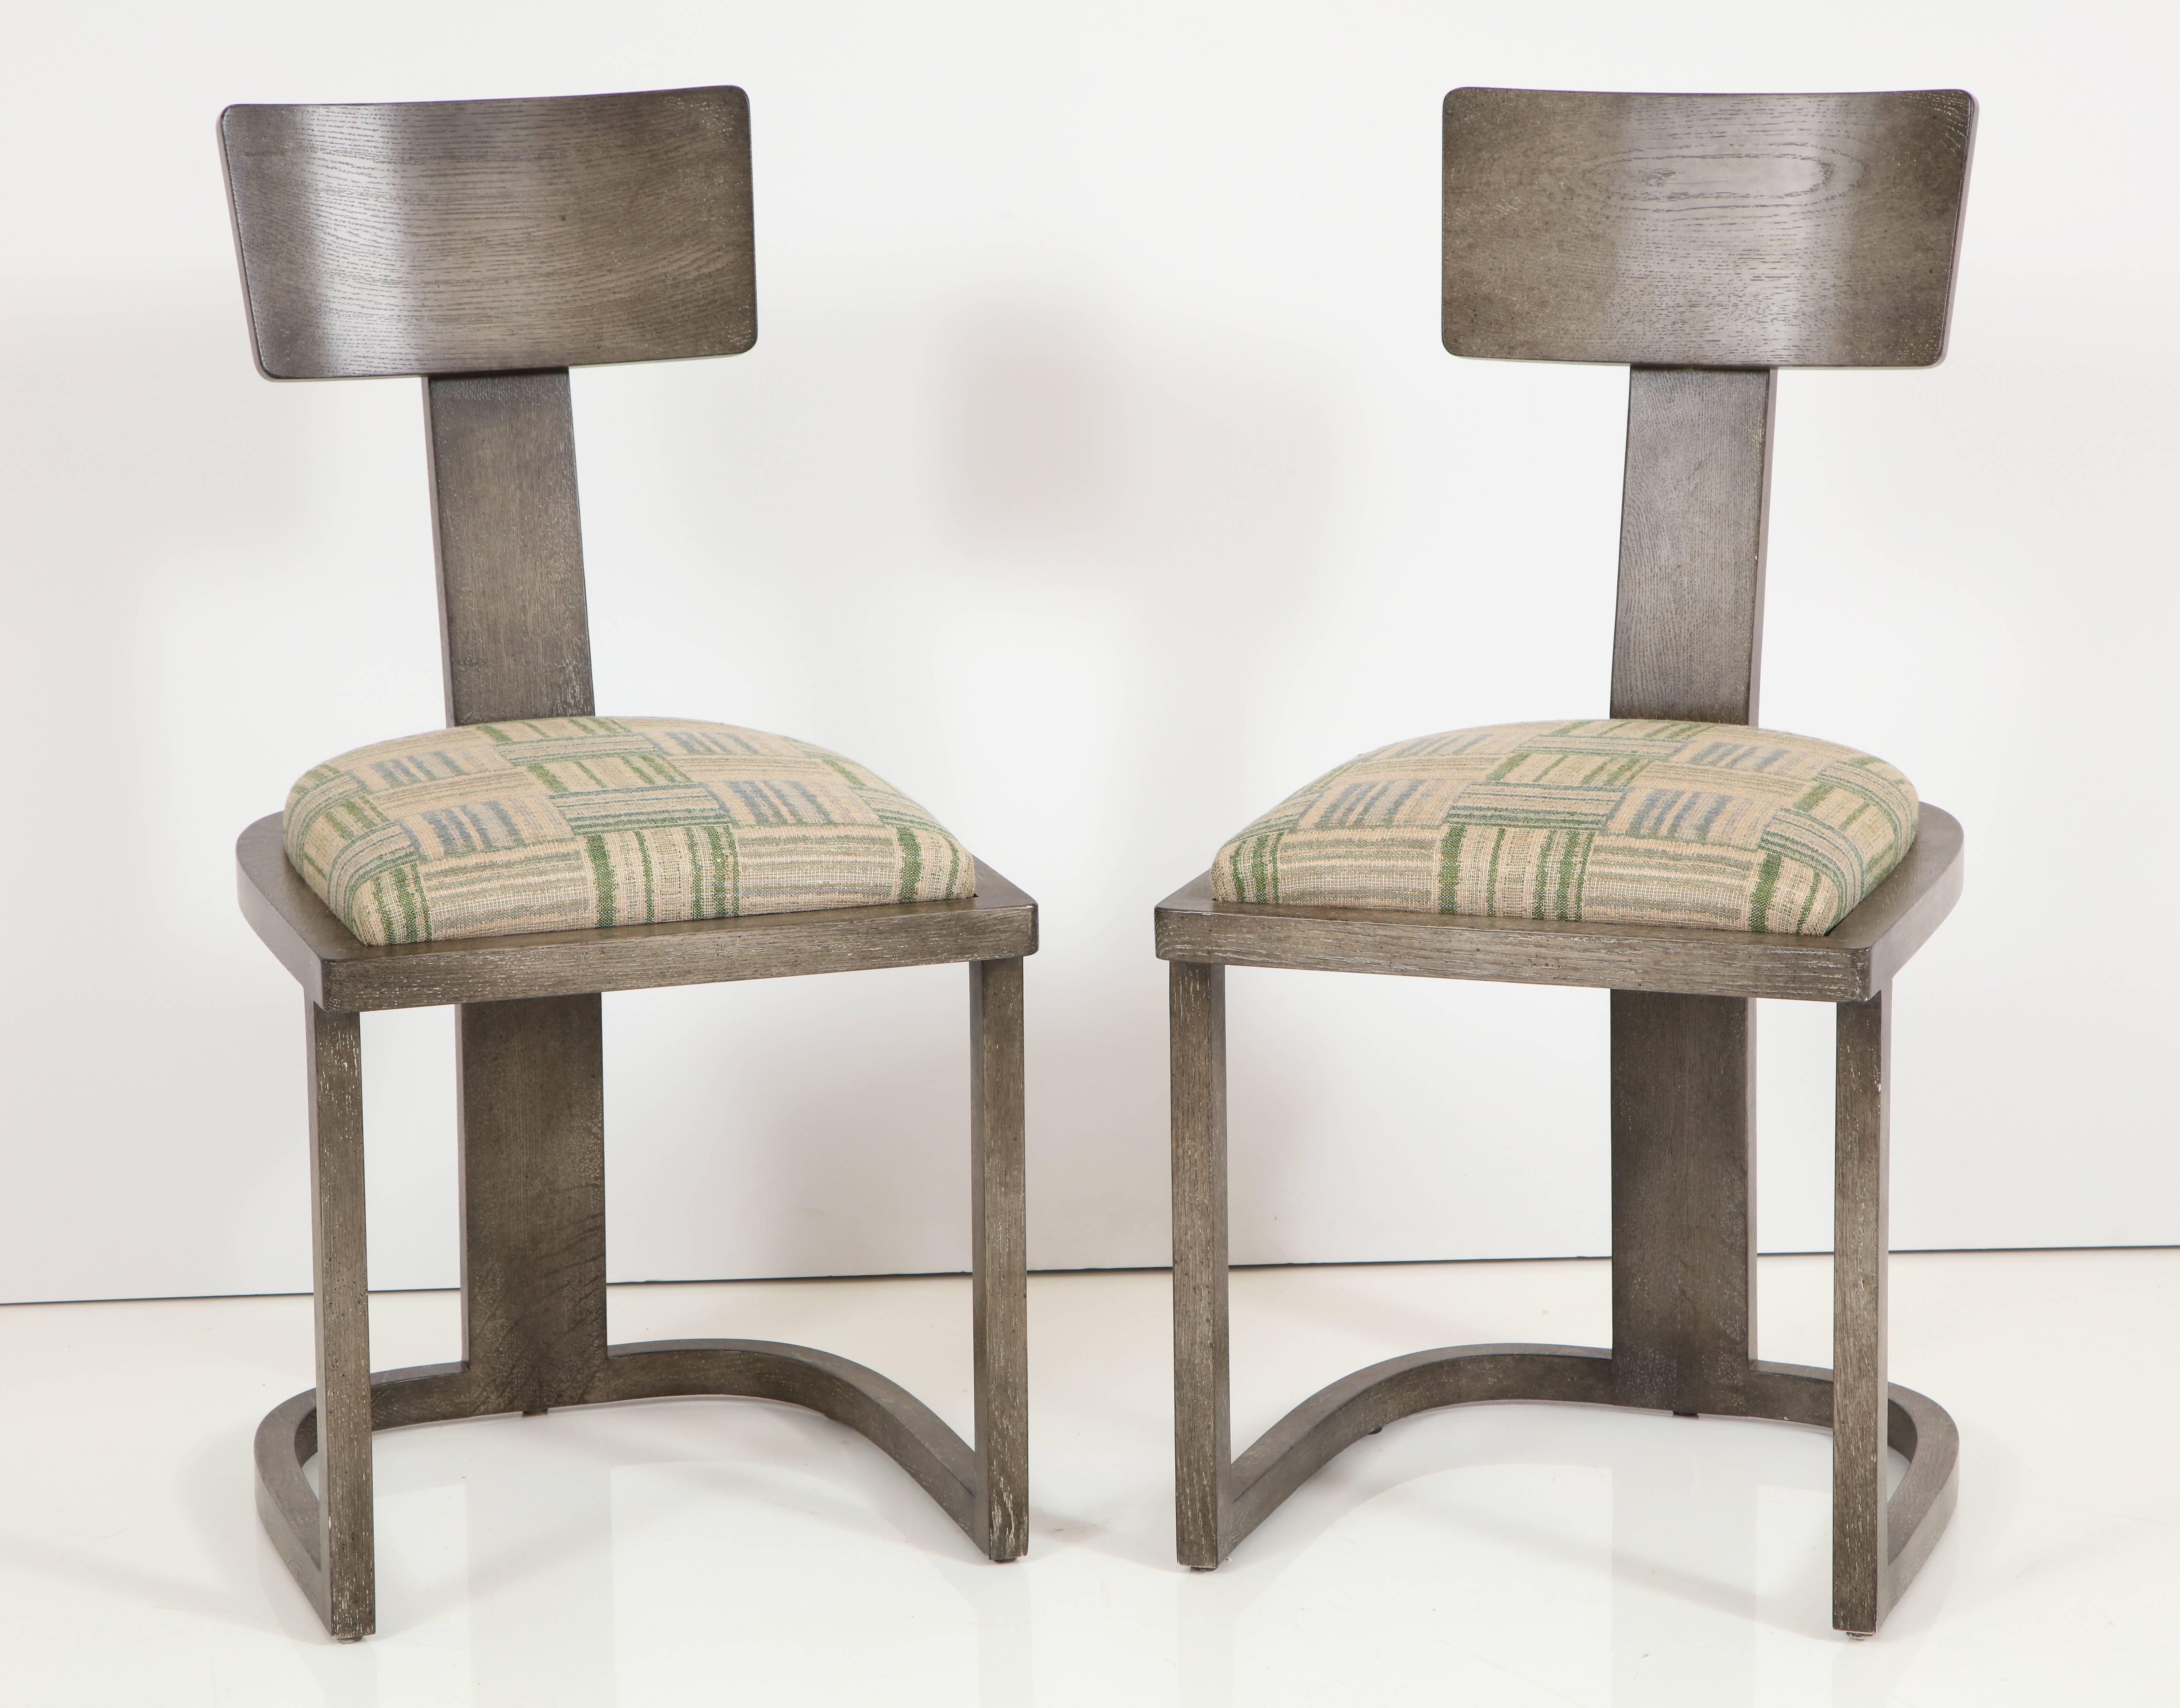 NK Collection T chair upholstered in green plaid finish in smoked oak finish.